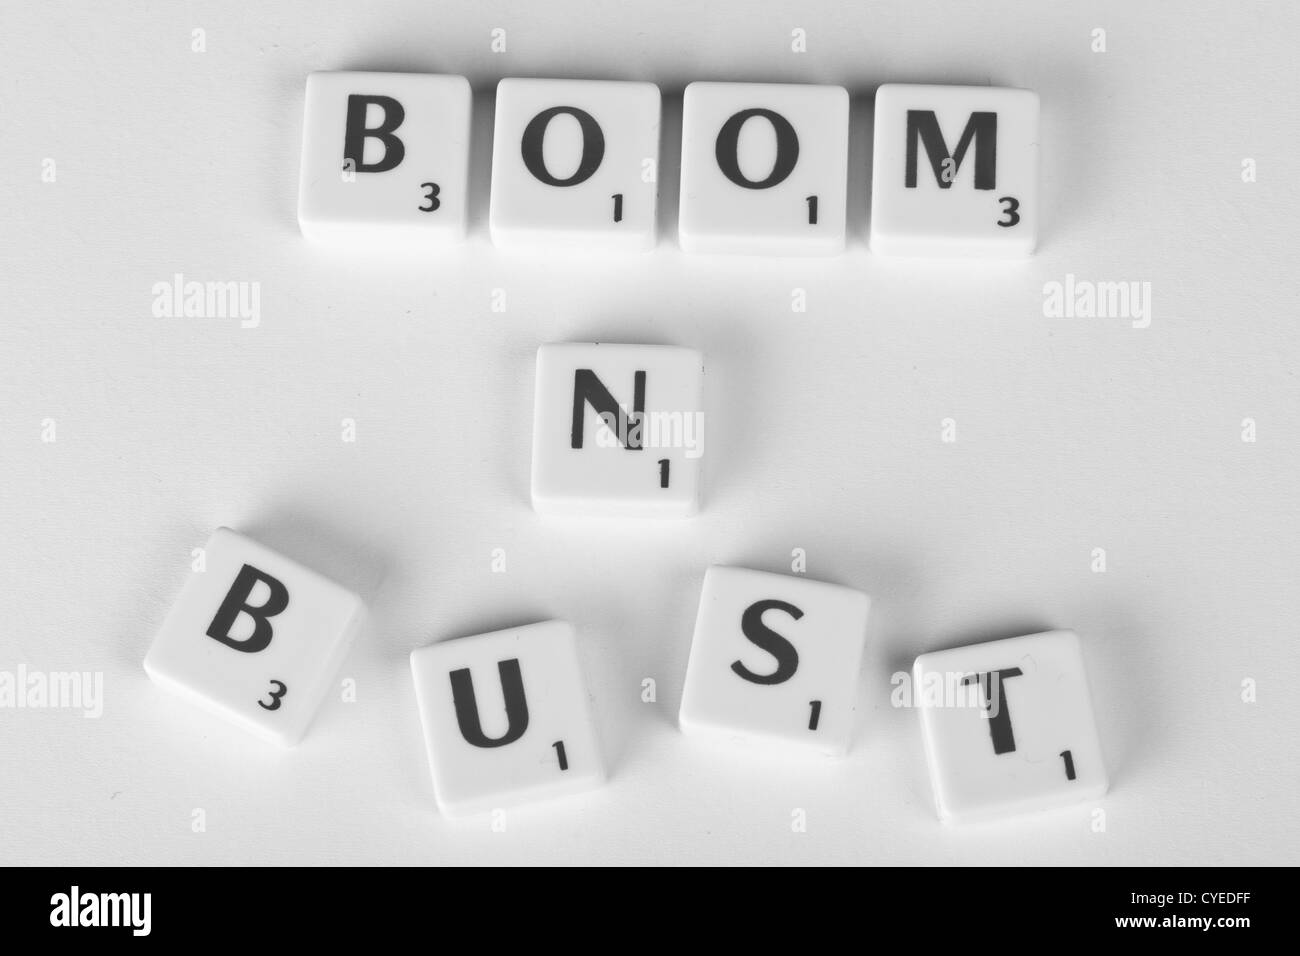 "boom n bust" boom and bust, symbolic symbolizes economic peaks and troughs which ebb and flow repeatedly,world economic turmoil Stock Photo